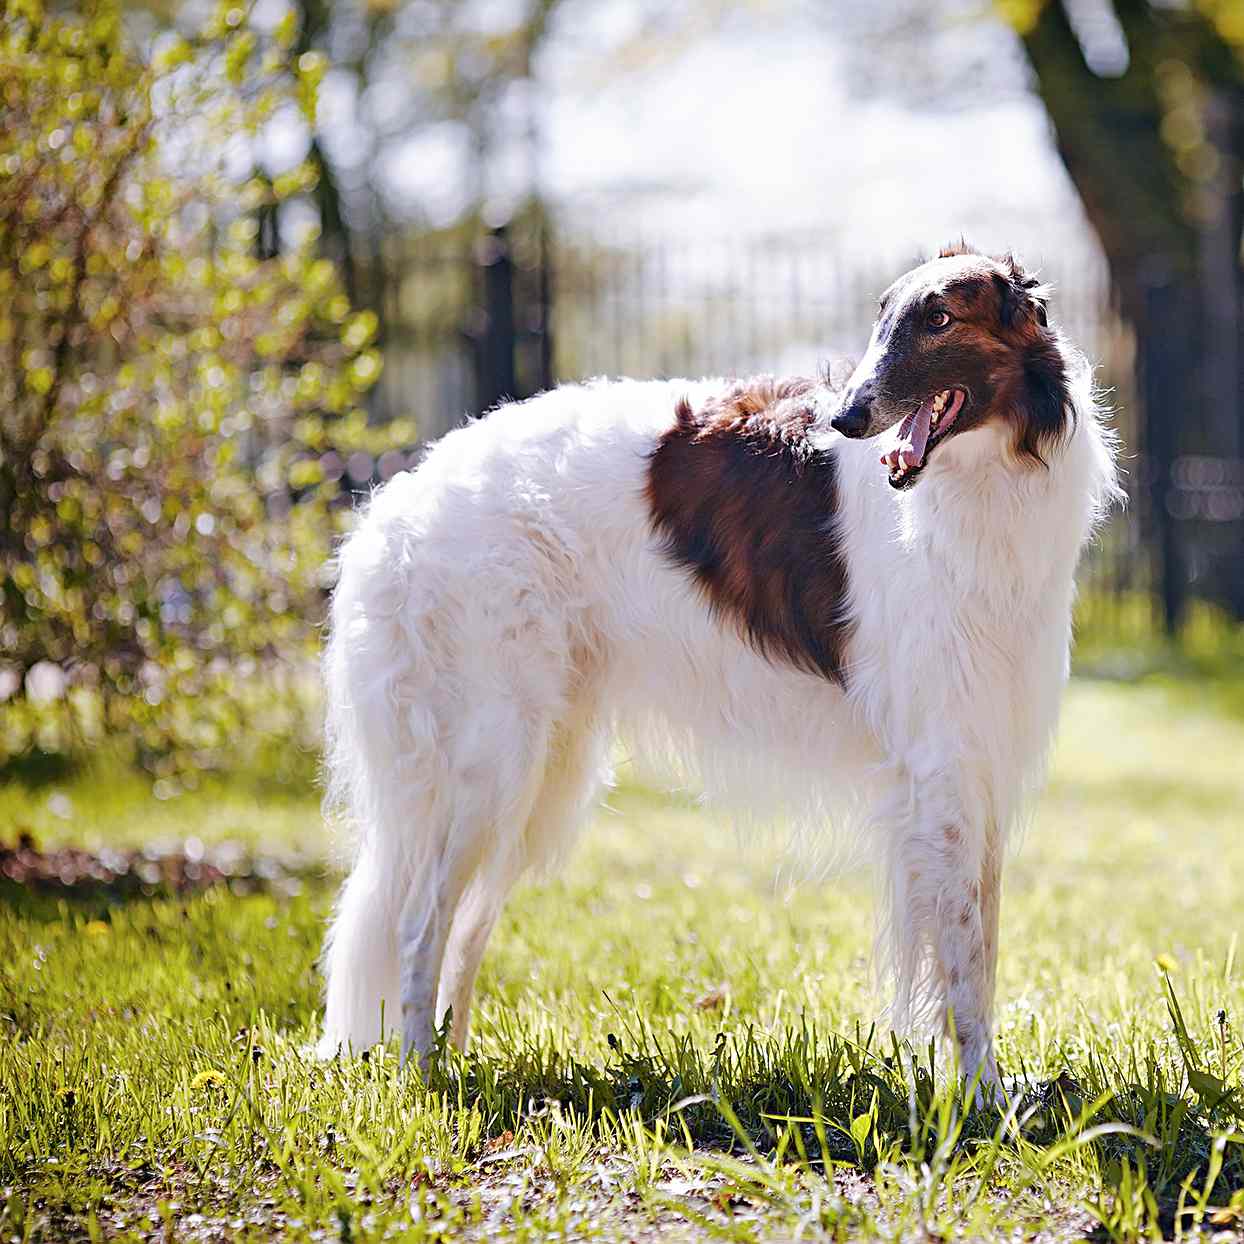 Borzoi standing outside in grass with a metal fence in the background